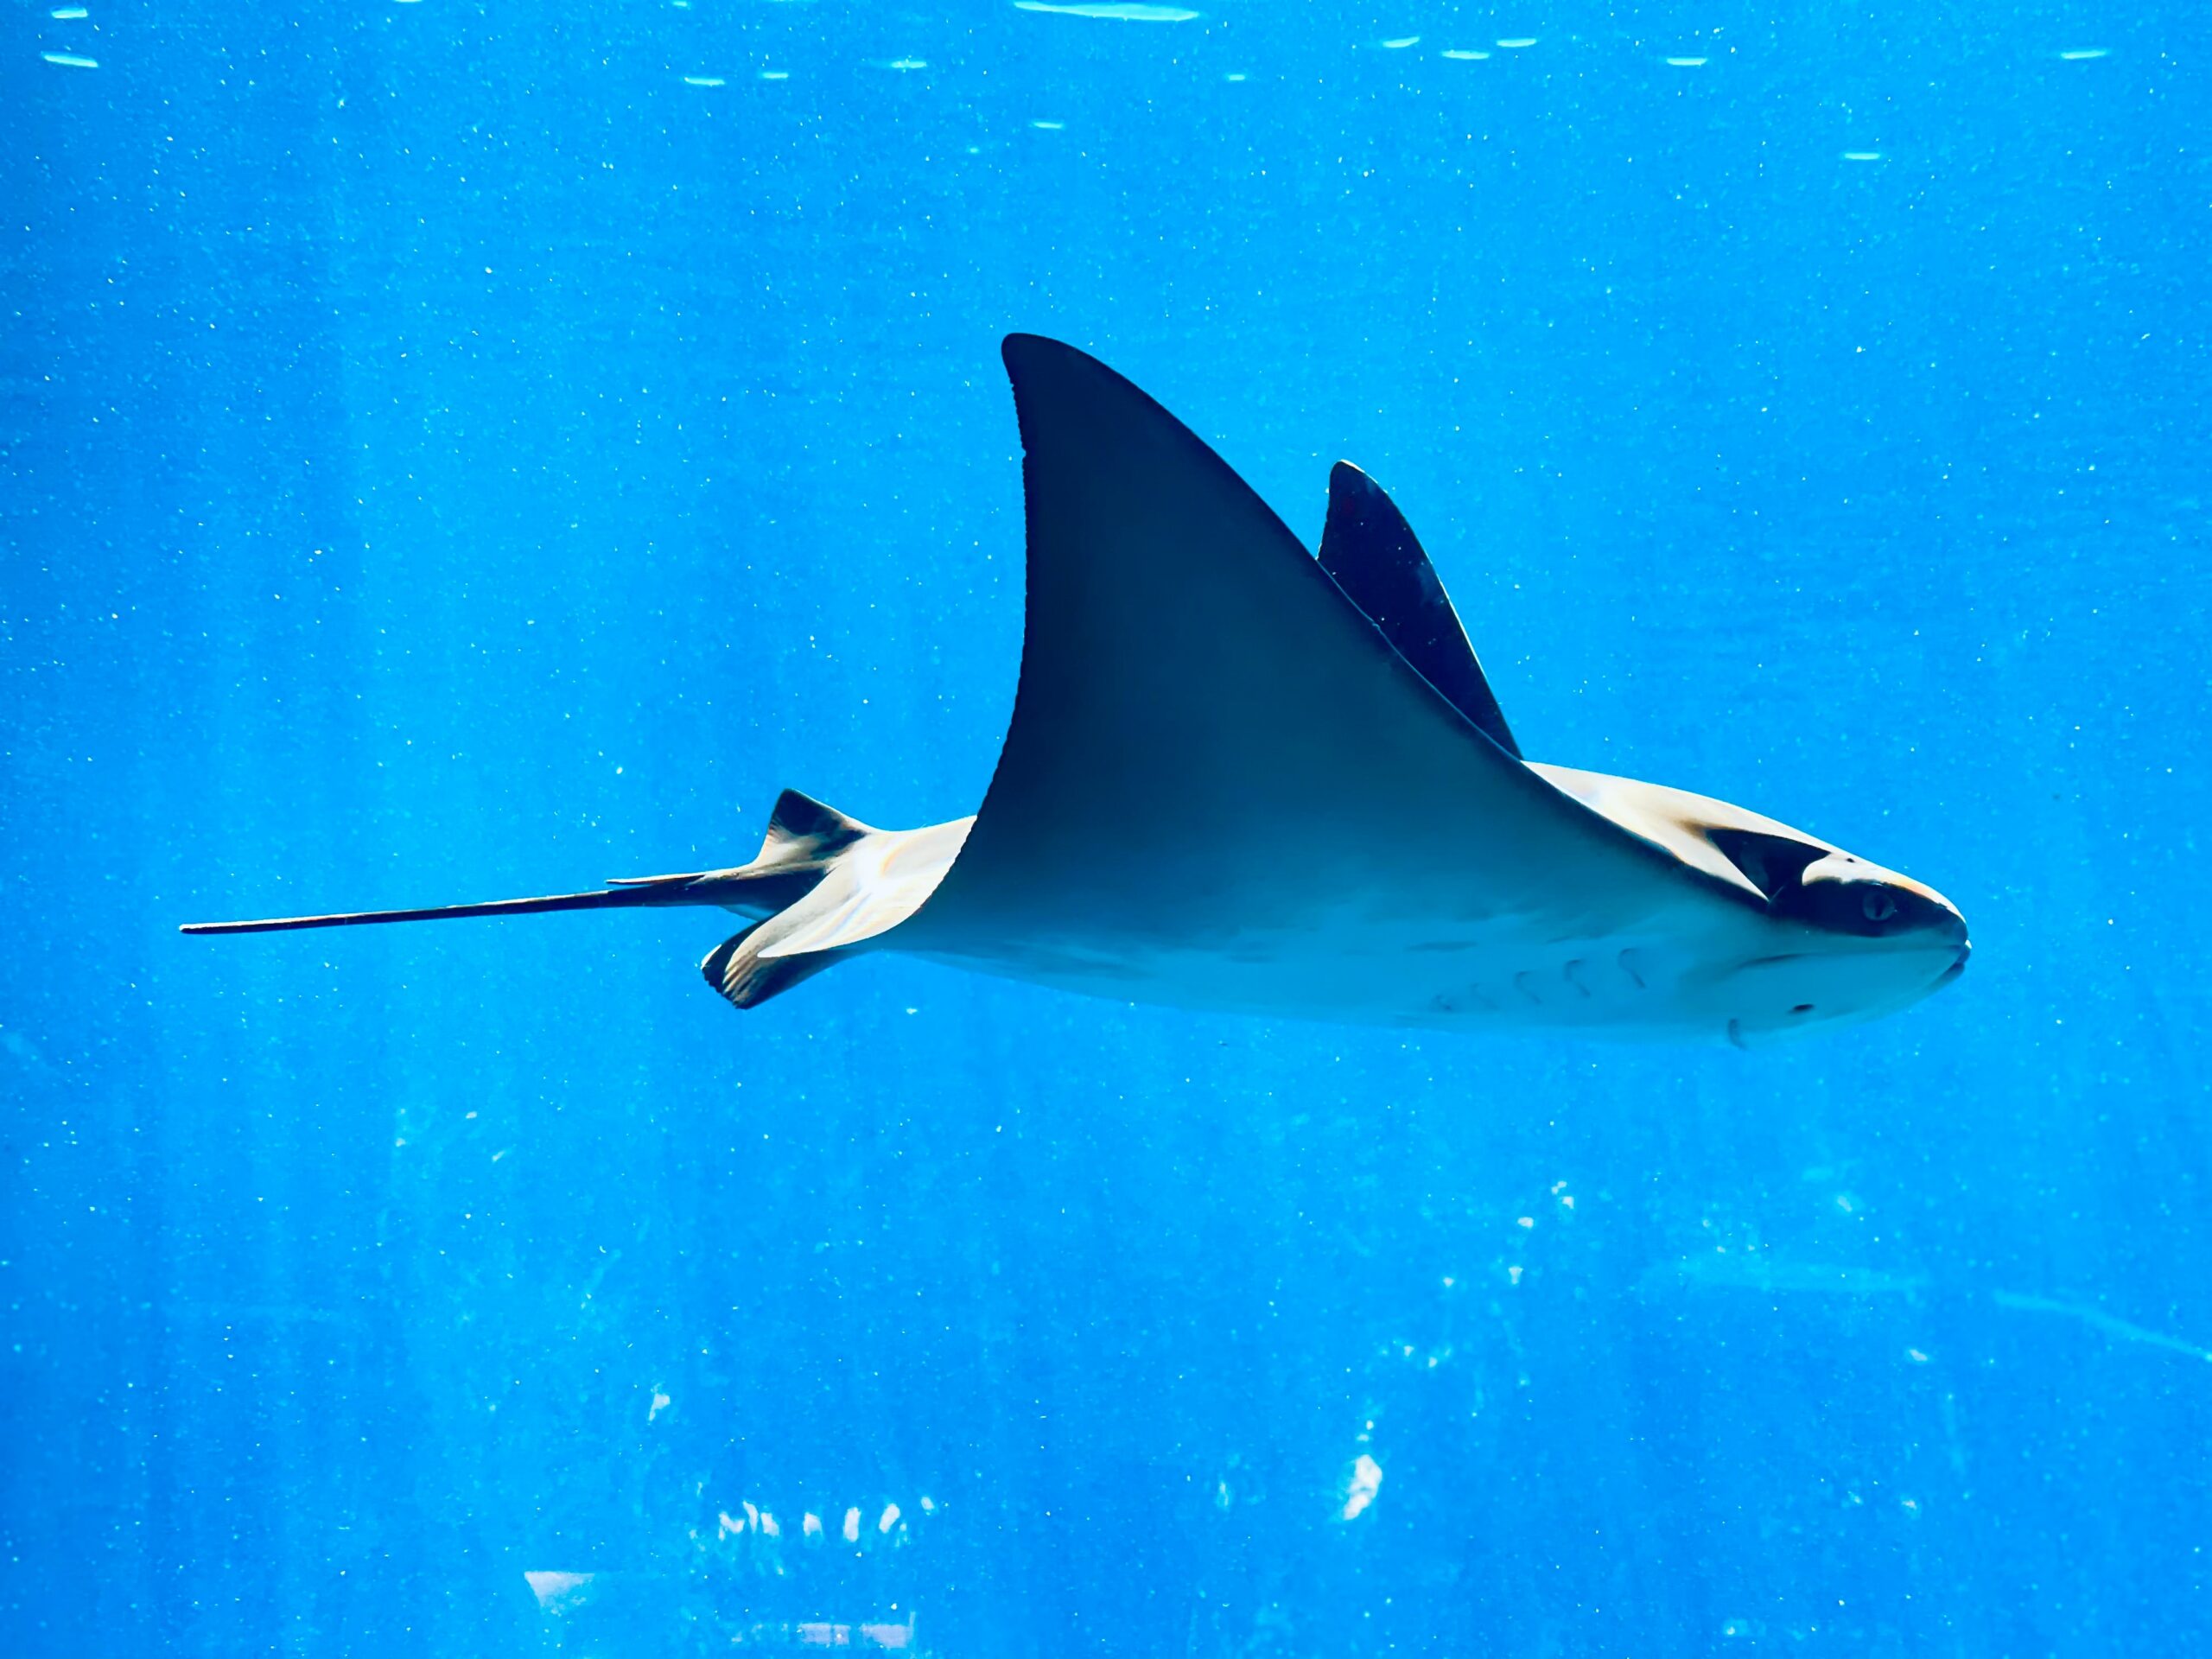 This underwater photograph was taken of a Manta Ray swimming in the ocean. The Manta Ray is grey in colour and has a white stomach. Its wide arms are above its body, and it has a long tail. Manta Rays have been seen here at Woodman Point beach.